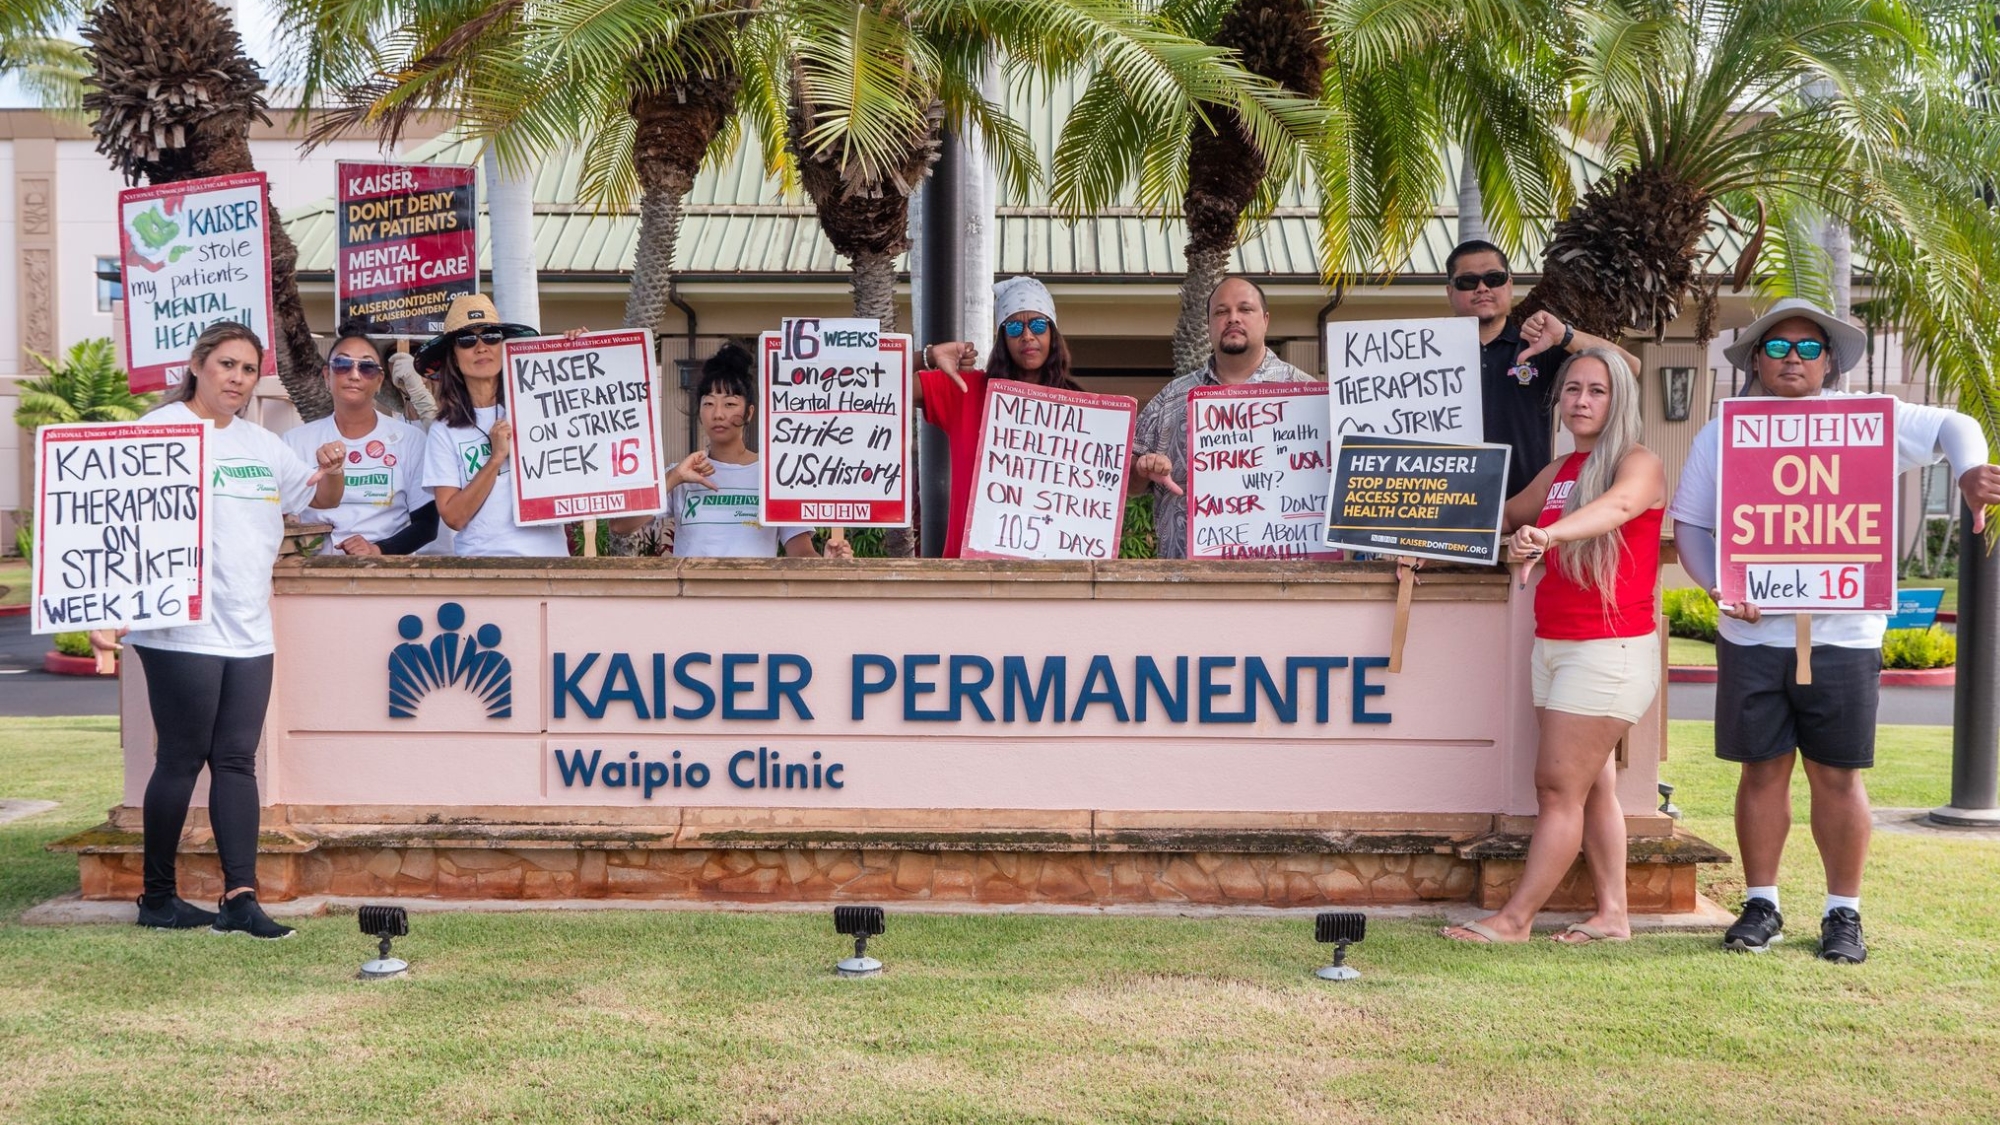 HSTA supports Kaiser mental health care workers during lengthy strike